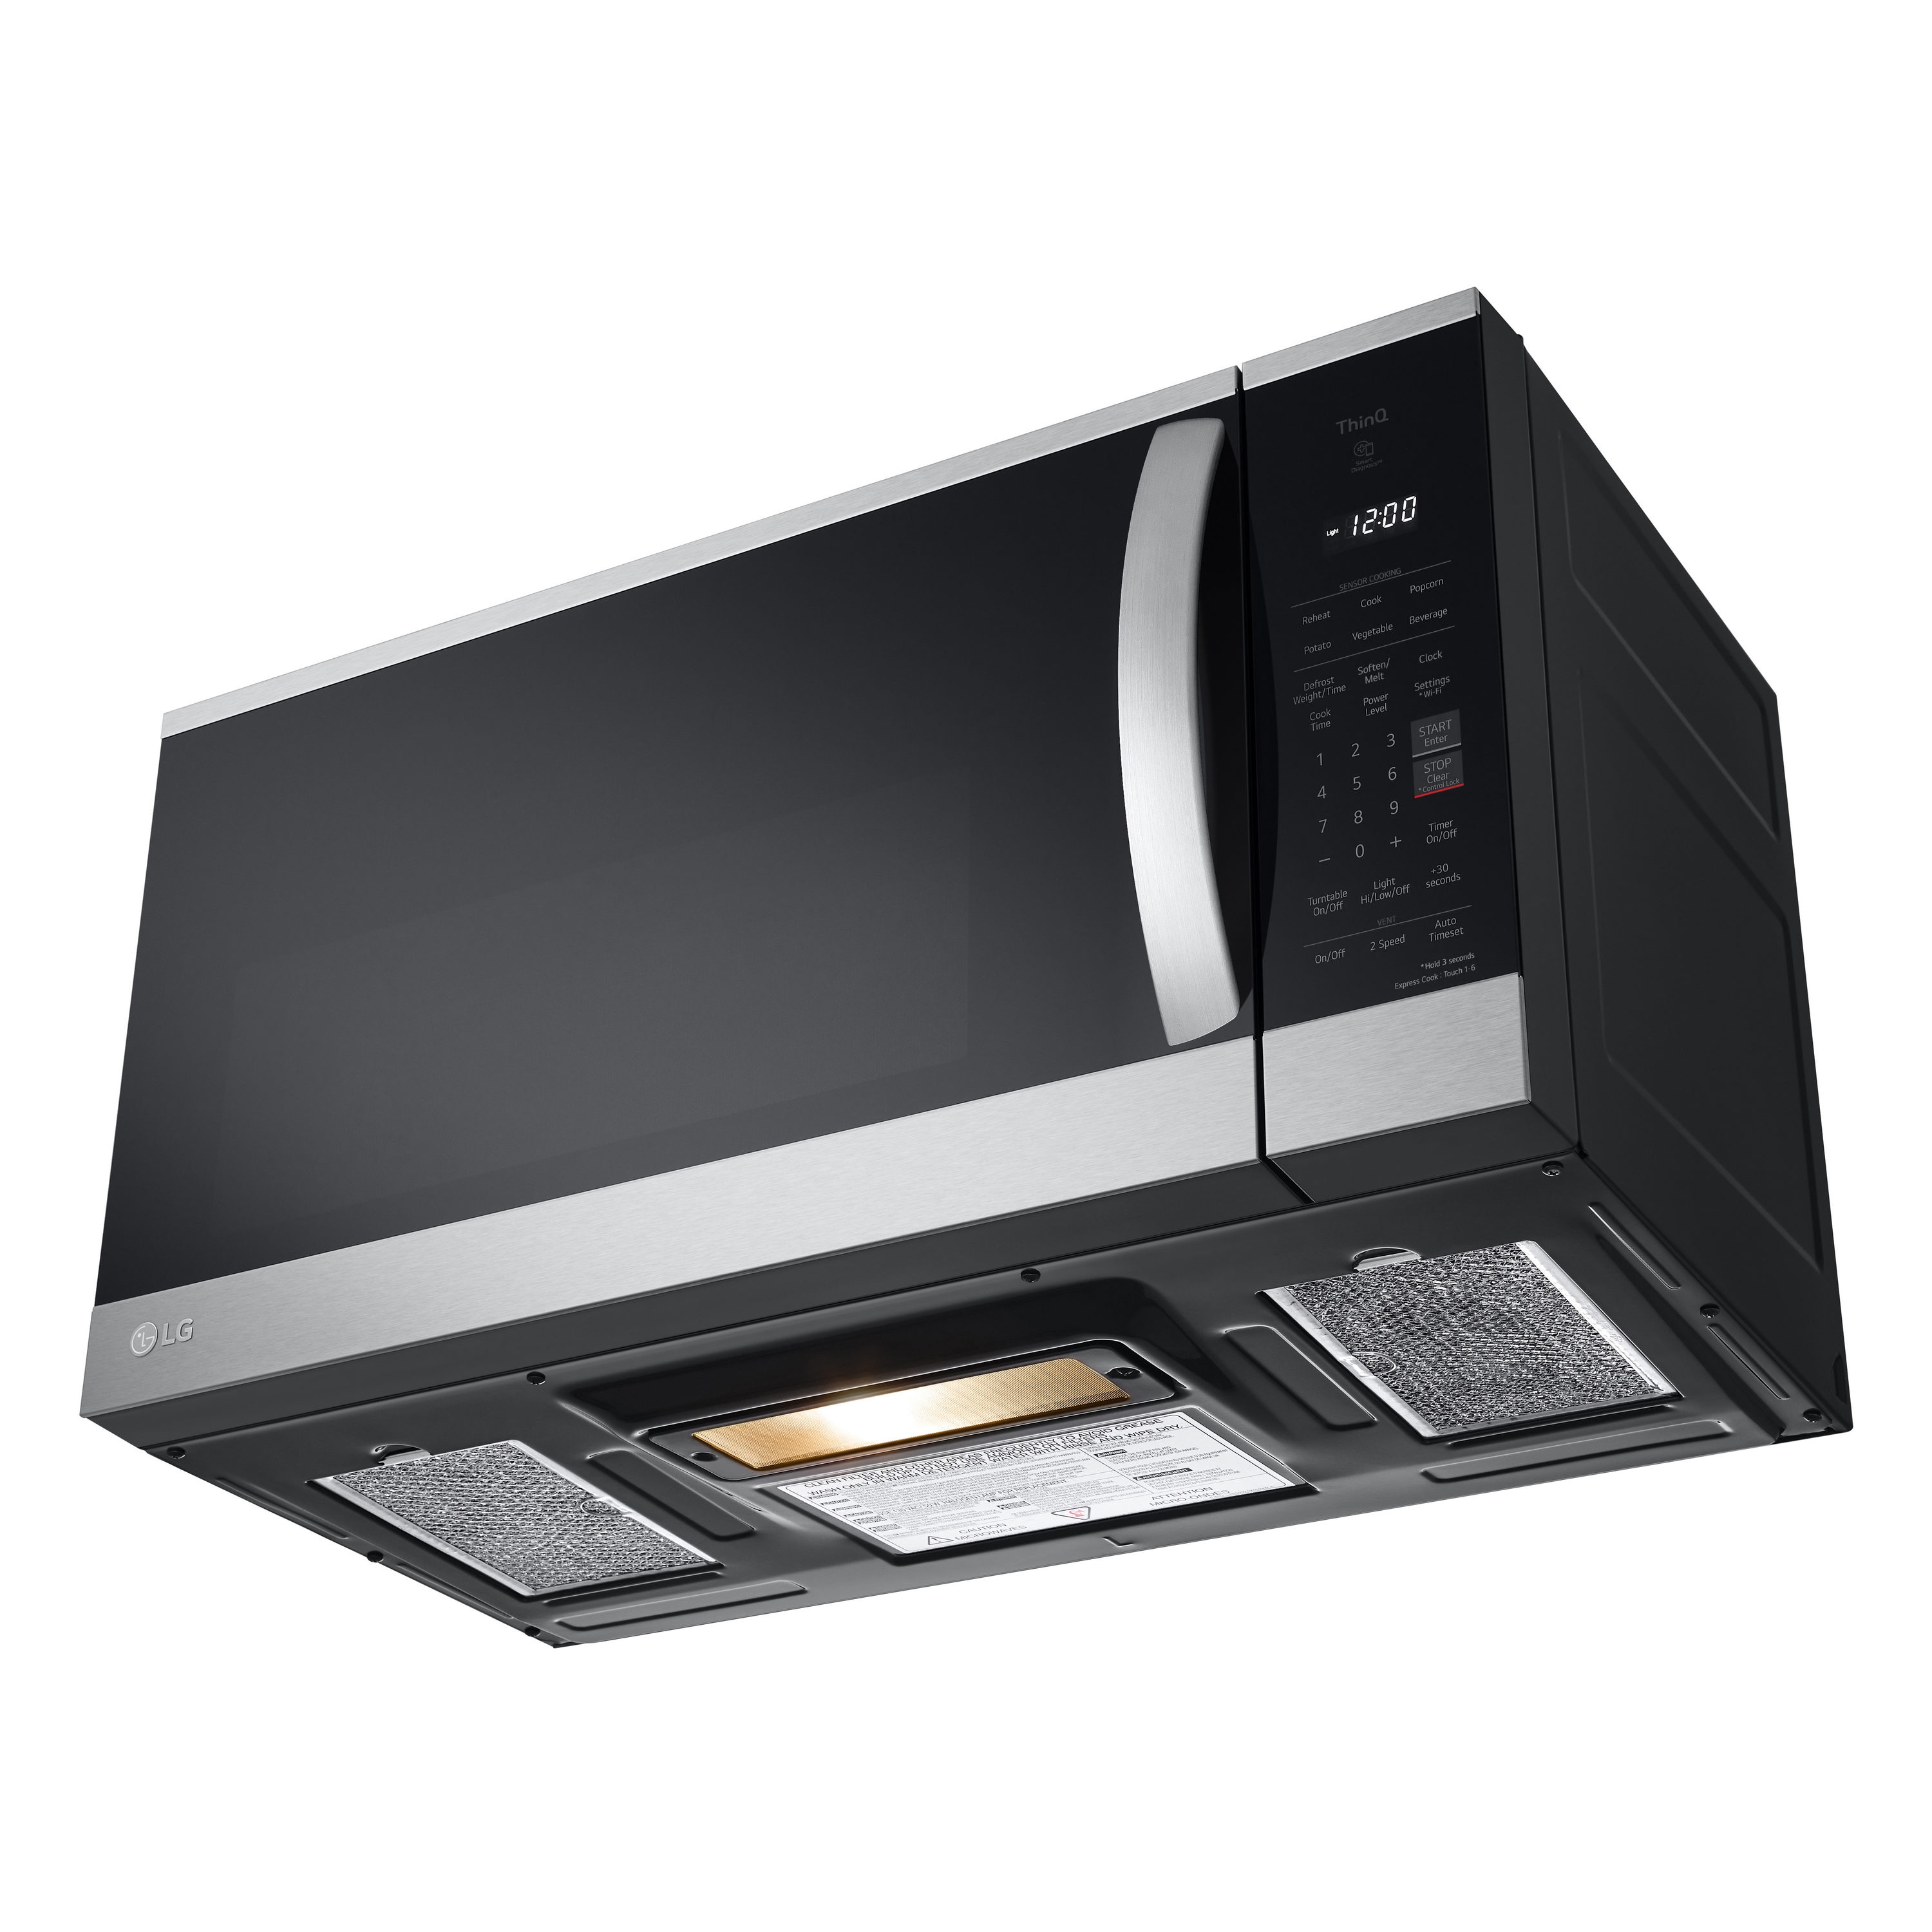 with Sensor Microwave Smart Over-the-Range (Printproof Cooking Steel) at Microwaves LG the department 1.8-cu ft Stainless 1000-Watt Over-the-Range in